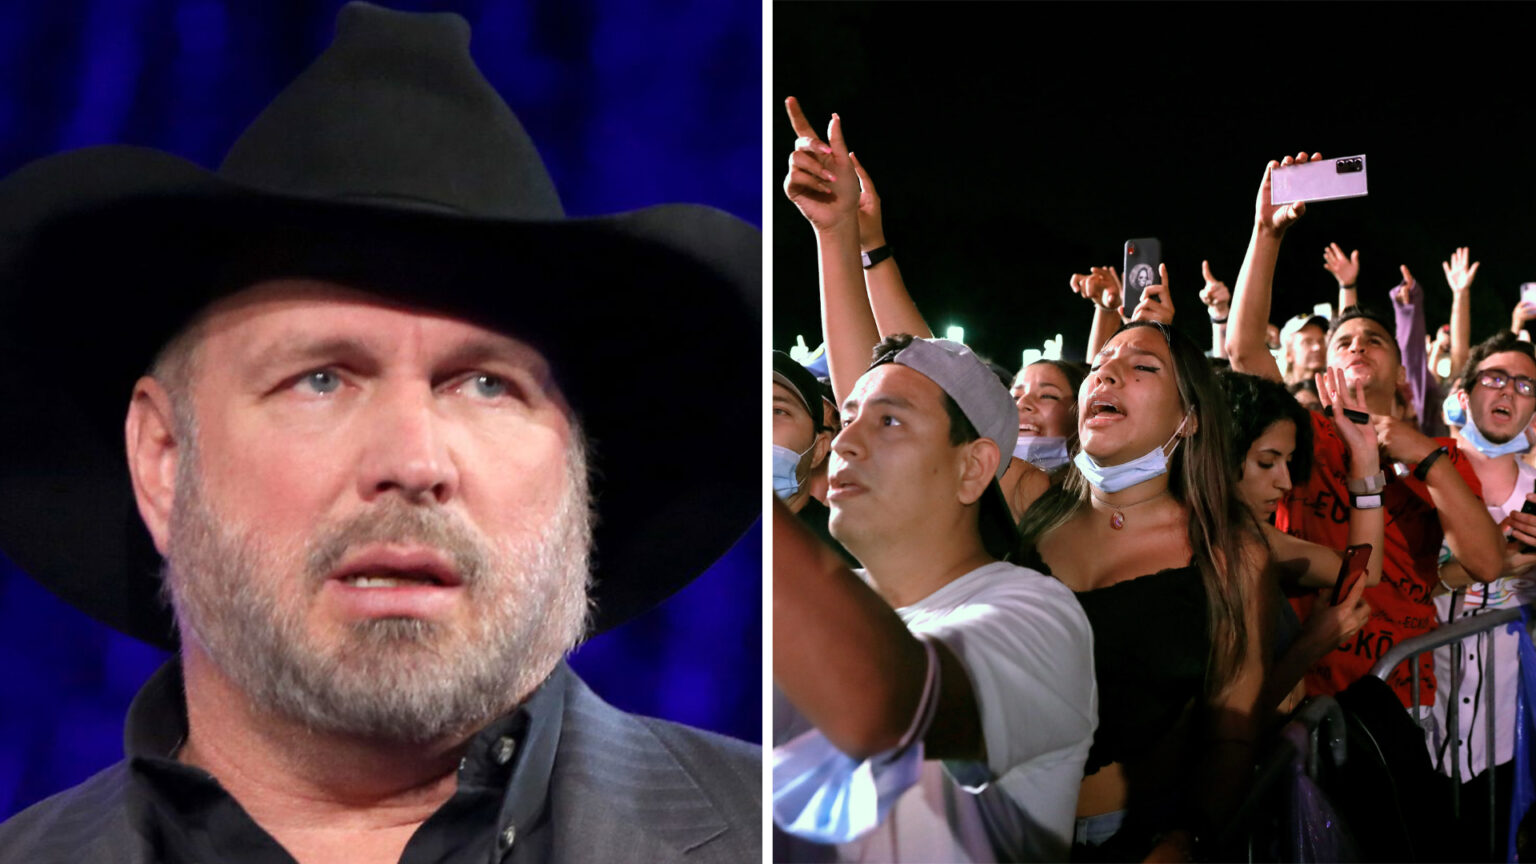 Breaking: Garth Brooks’ Attempt to Rap at Country Music Festival Ends with Boos